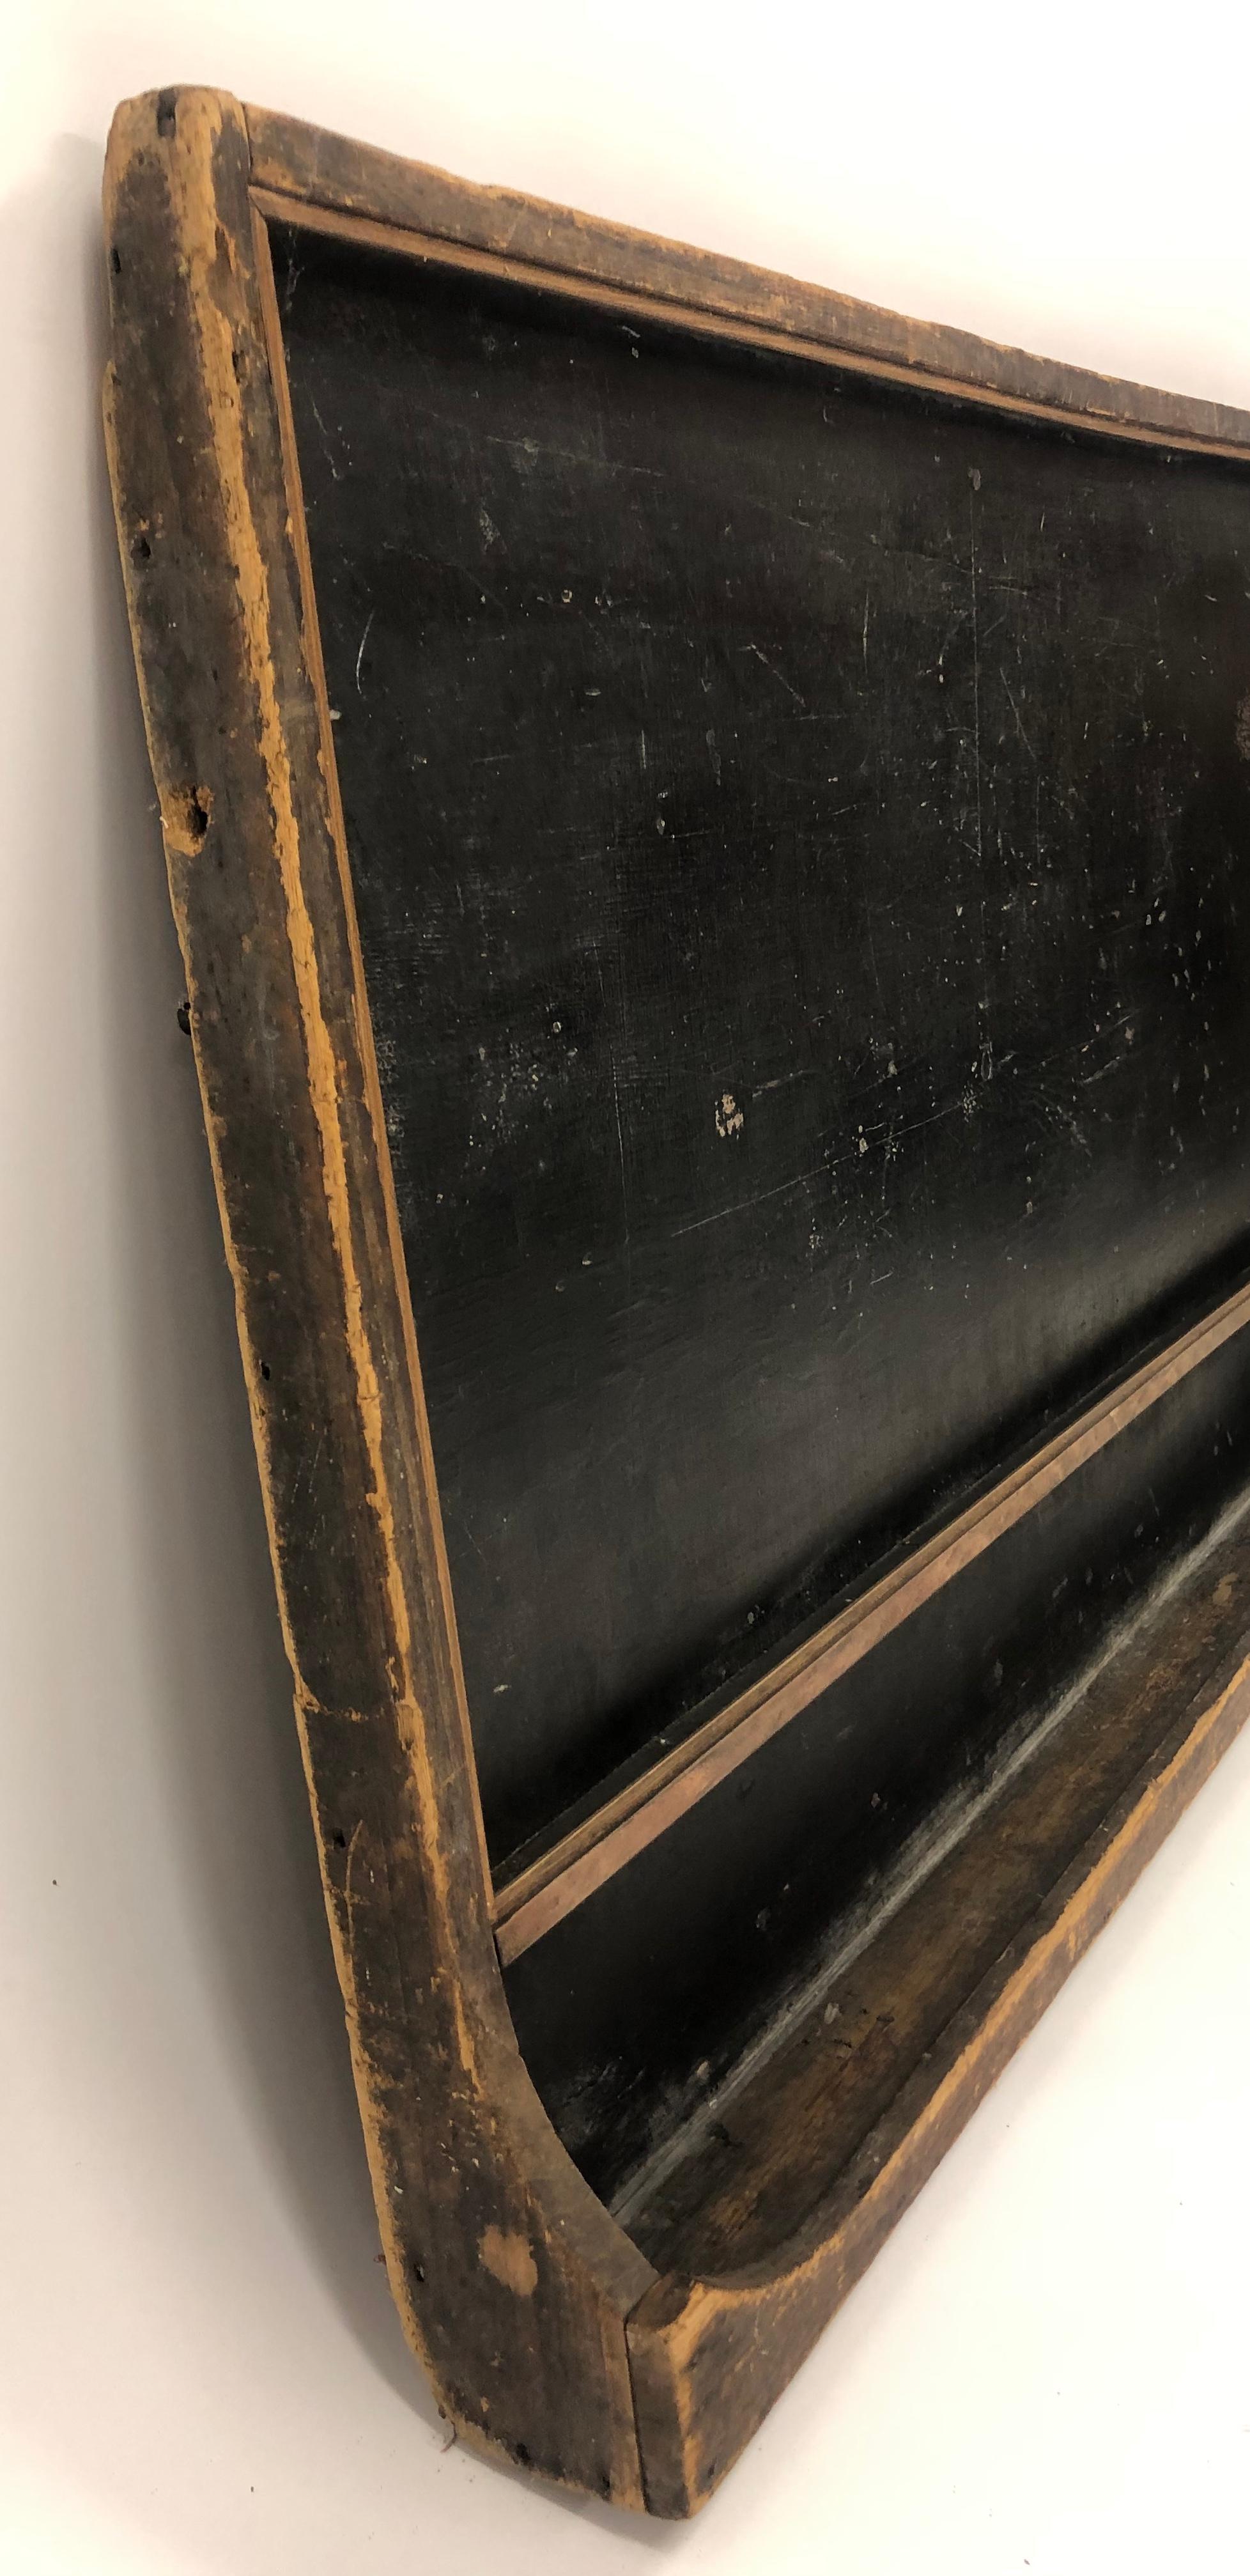 Antique chalkboard great for a country kitchen.

Property from esteemed interior designer Juan Montoya. Juan Montoya is one of the most acclaimed and prolific interior designers in the world today. Juan Montoya was born and spent his early years